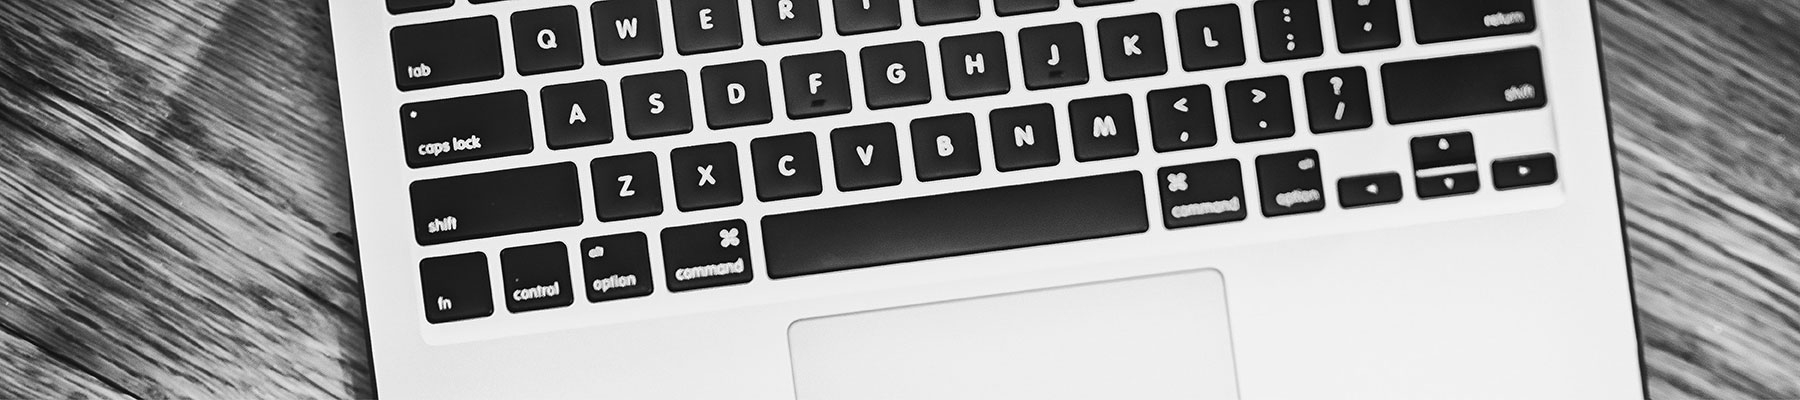 black and white photo of a laptop keyboard